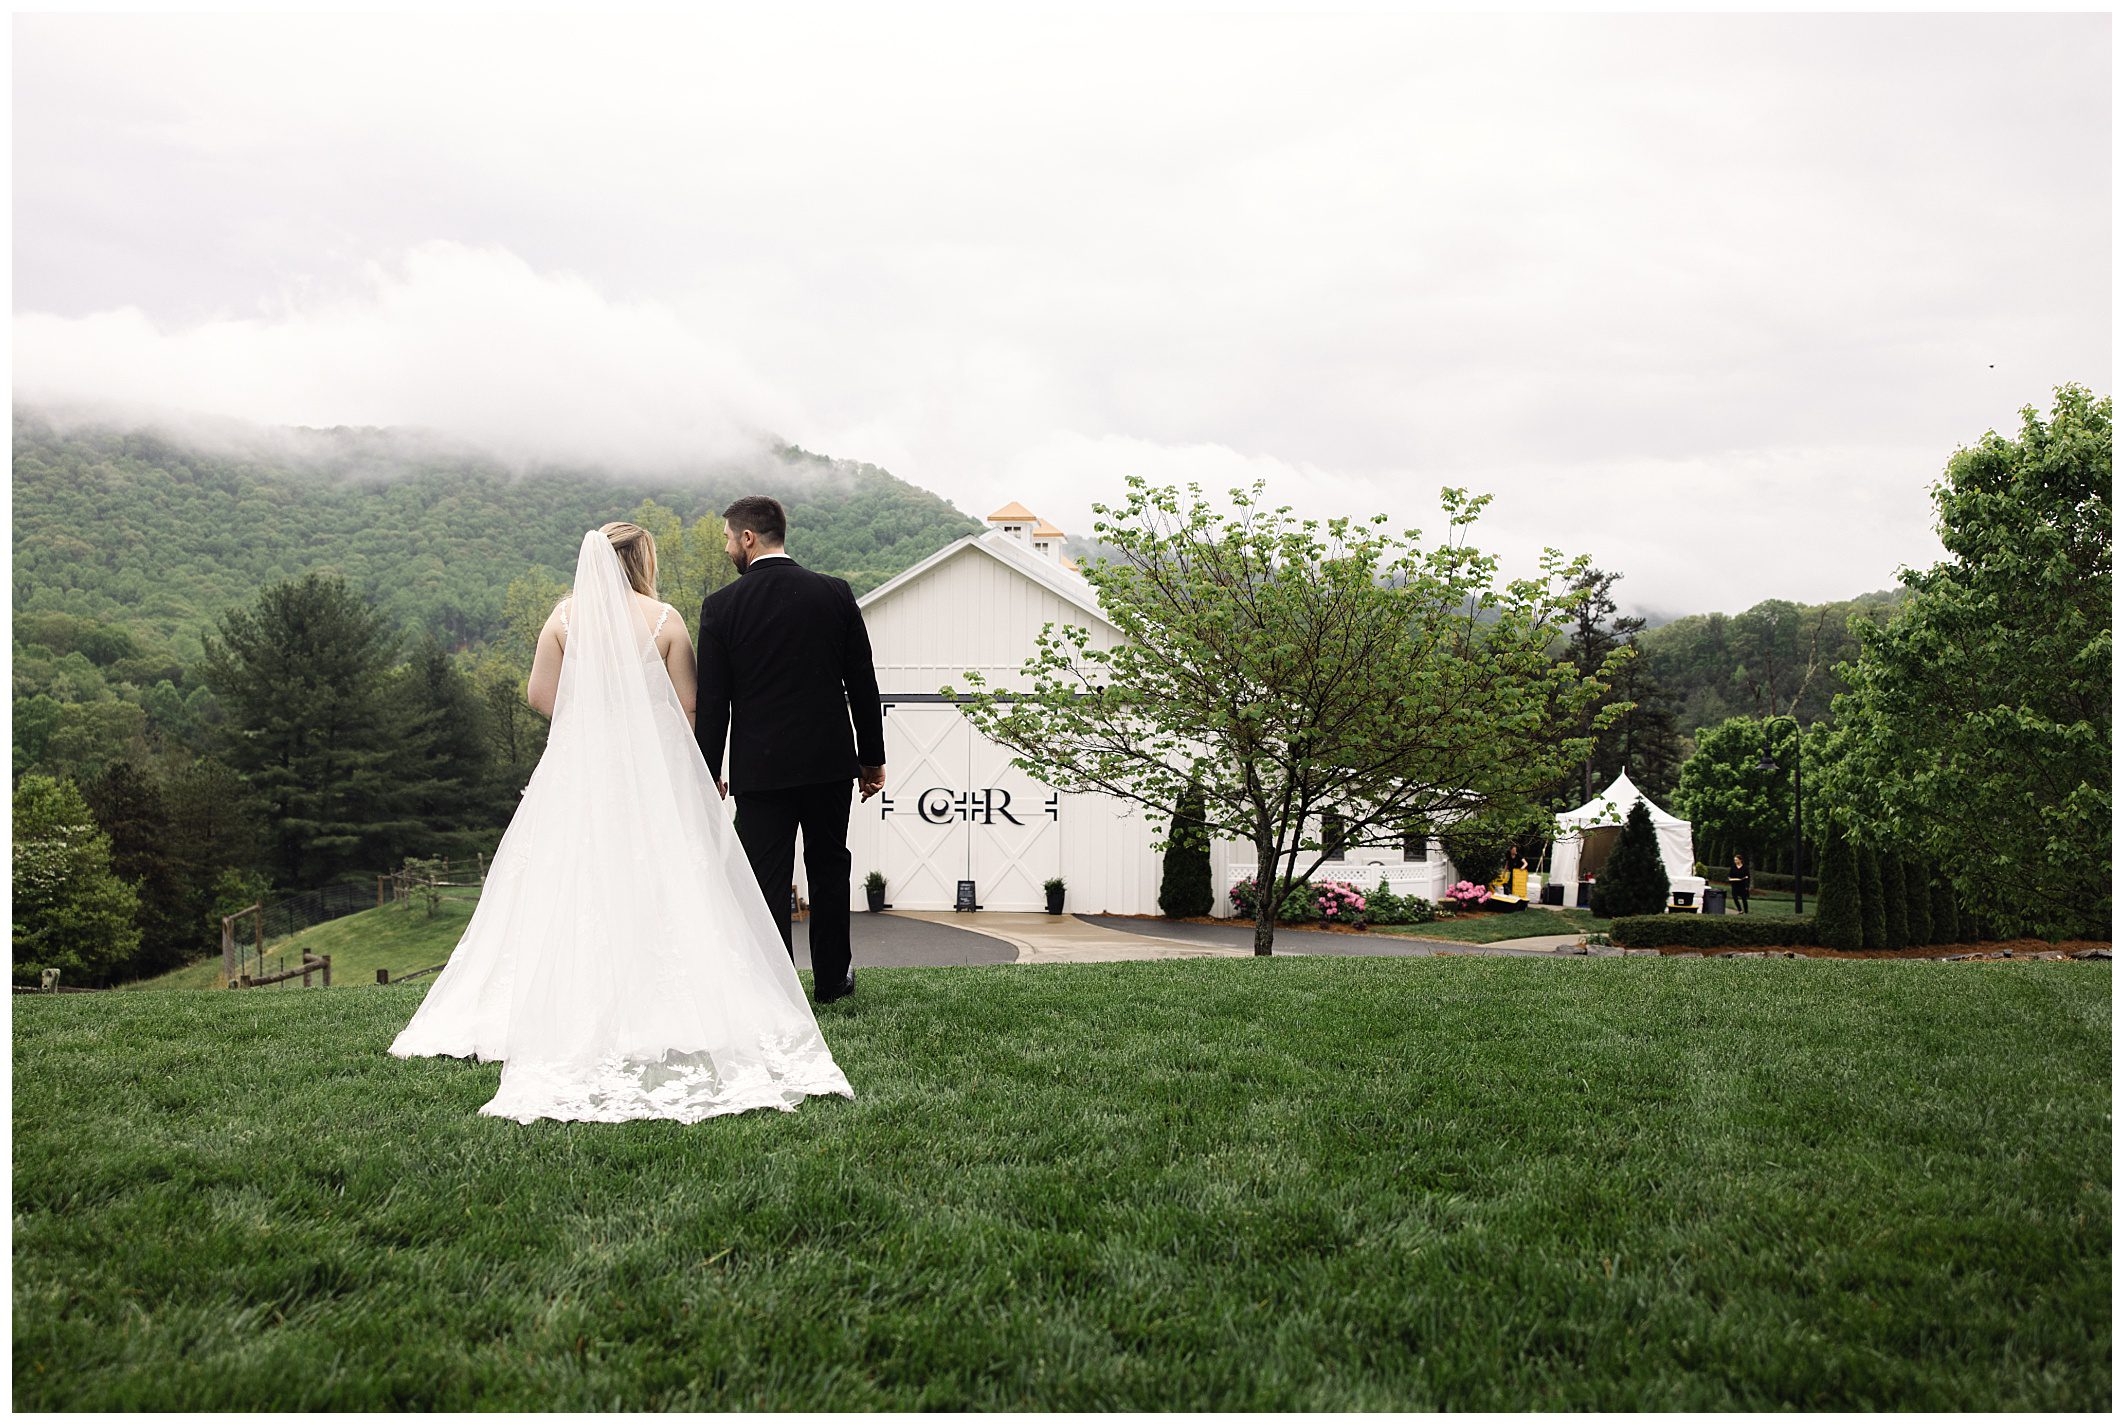 A bride and groom holding hands, walking towards a white chapel with mountains in the background on a rainy day at Chestnut Ridge.